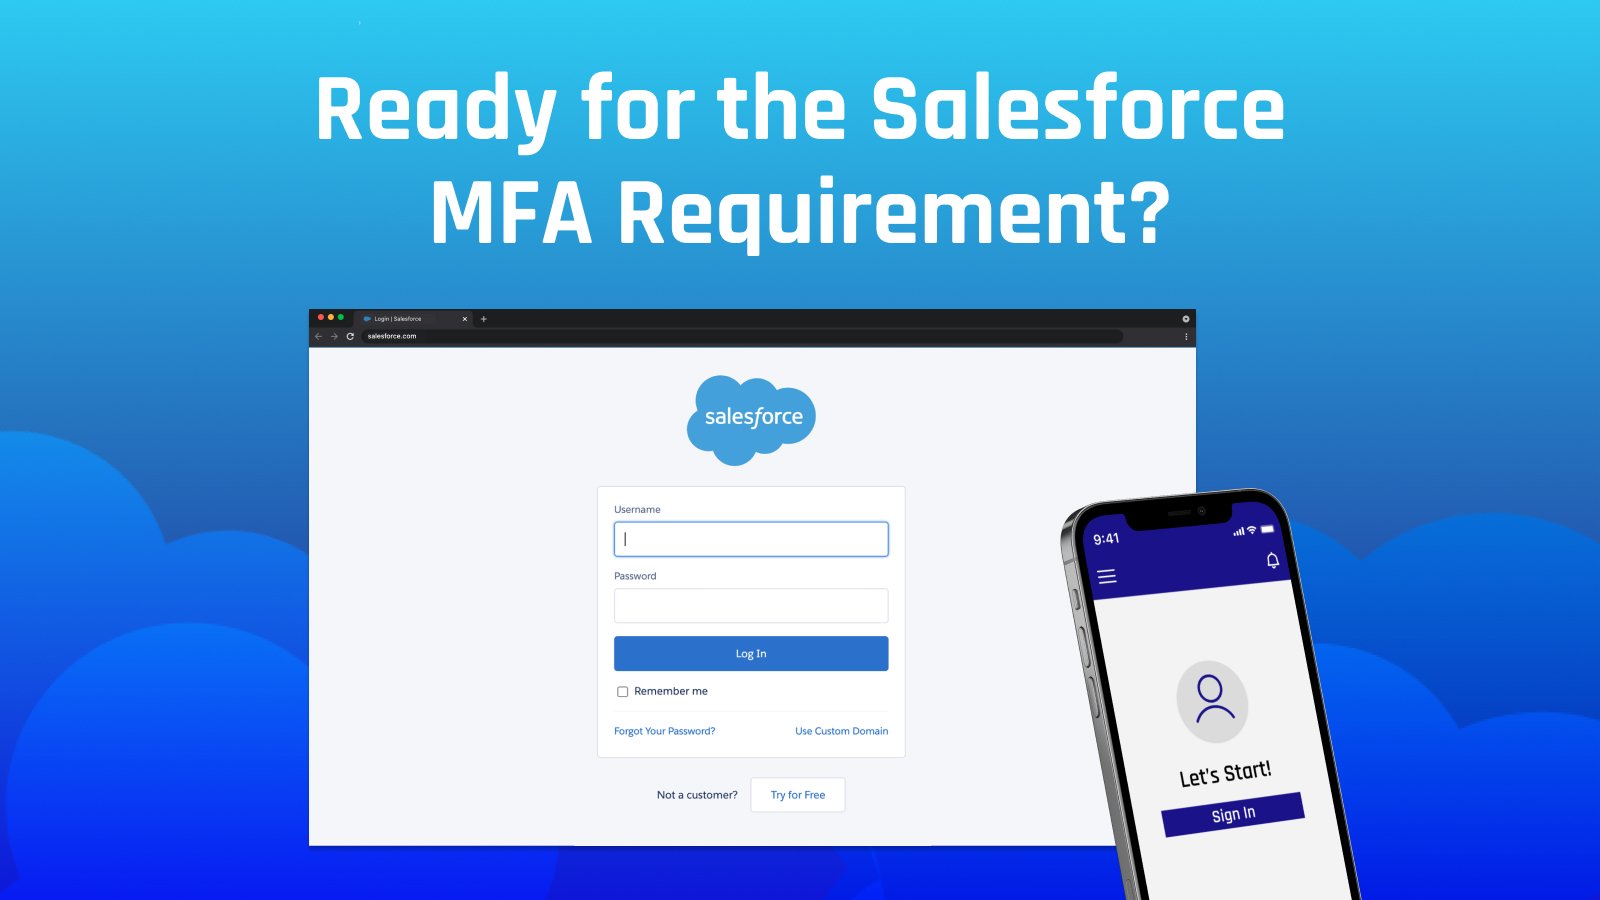 Are You Ready for the Salesforce MFA Requirement?